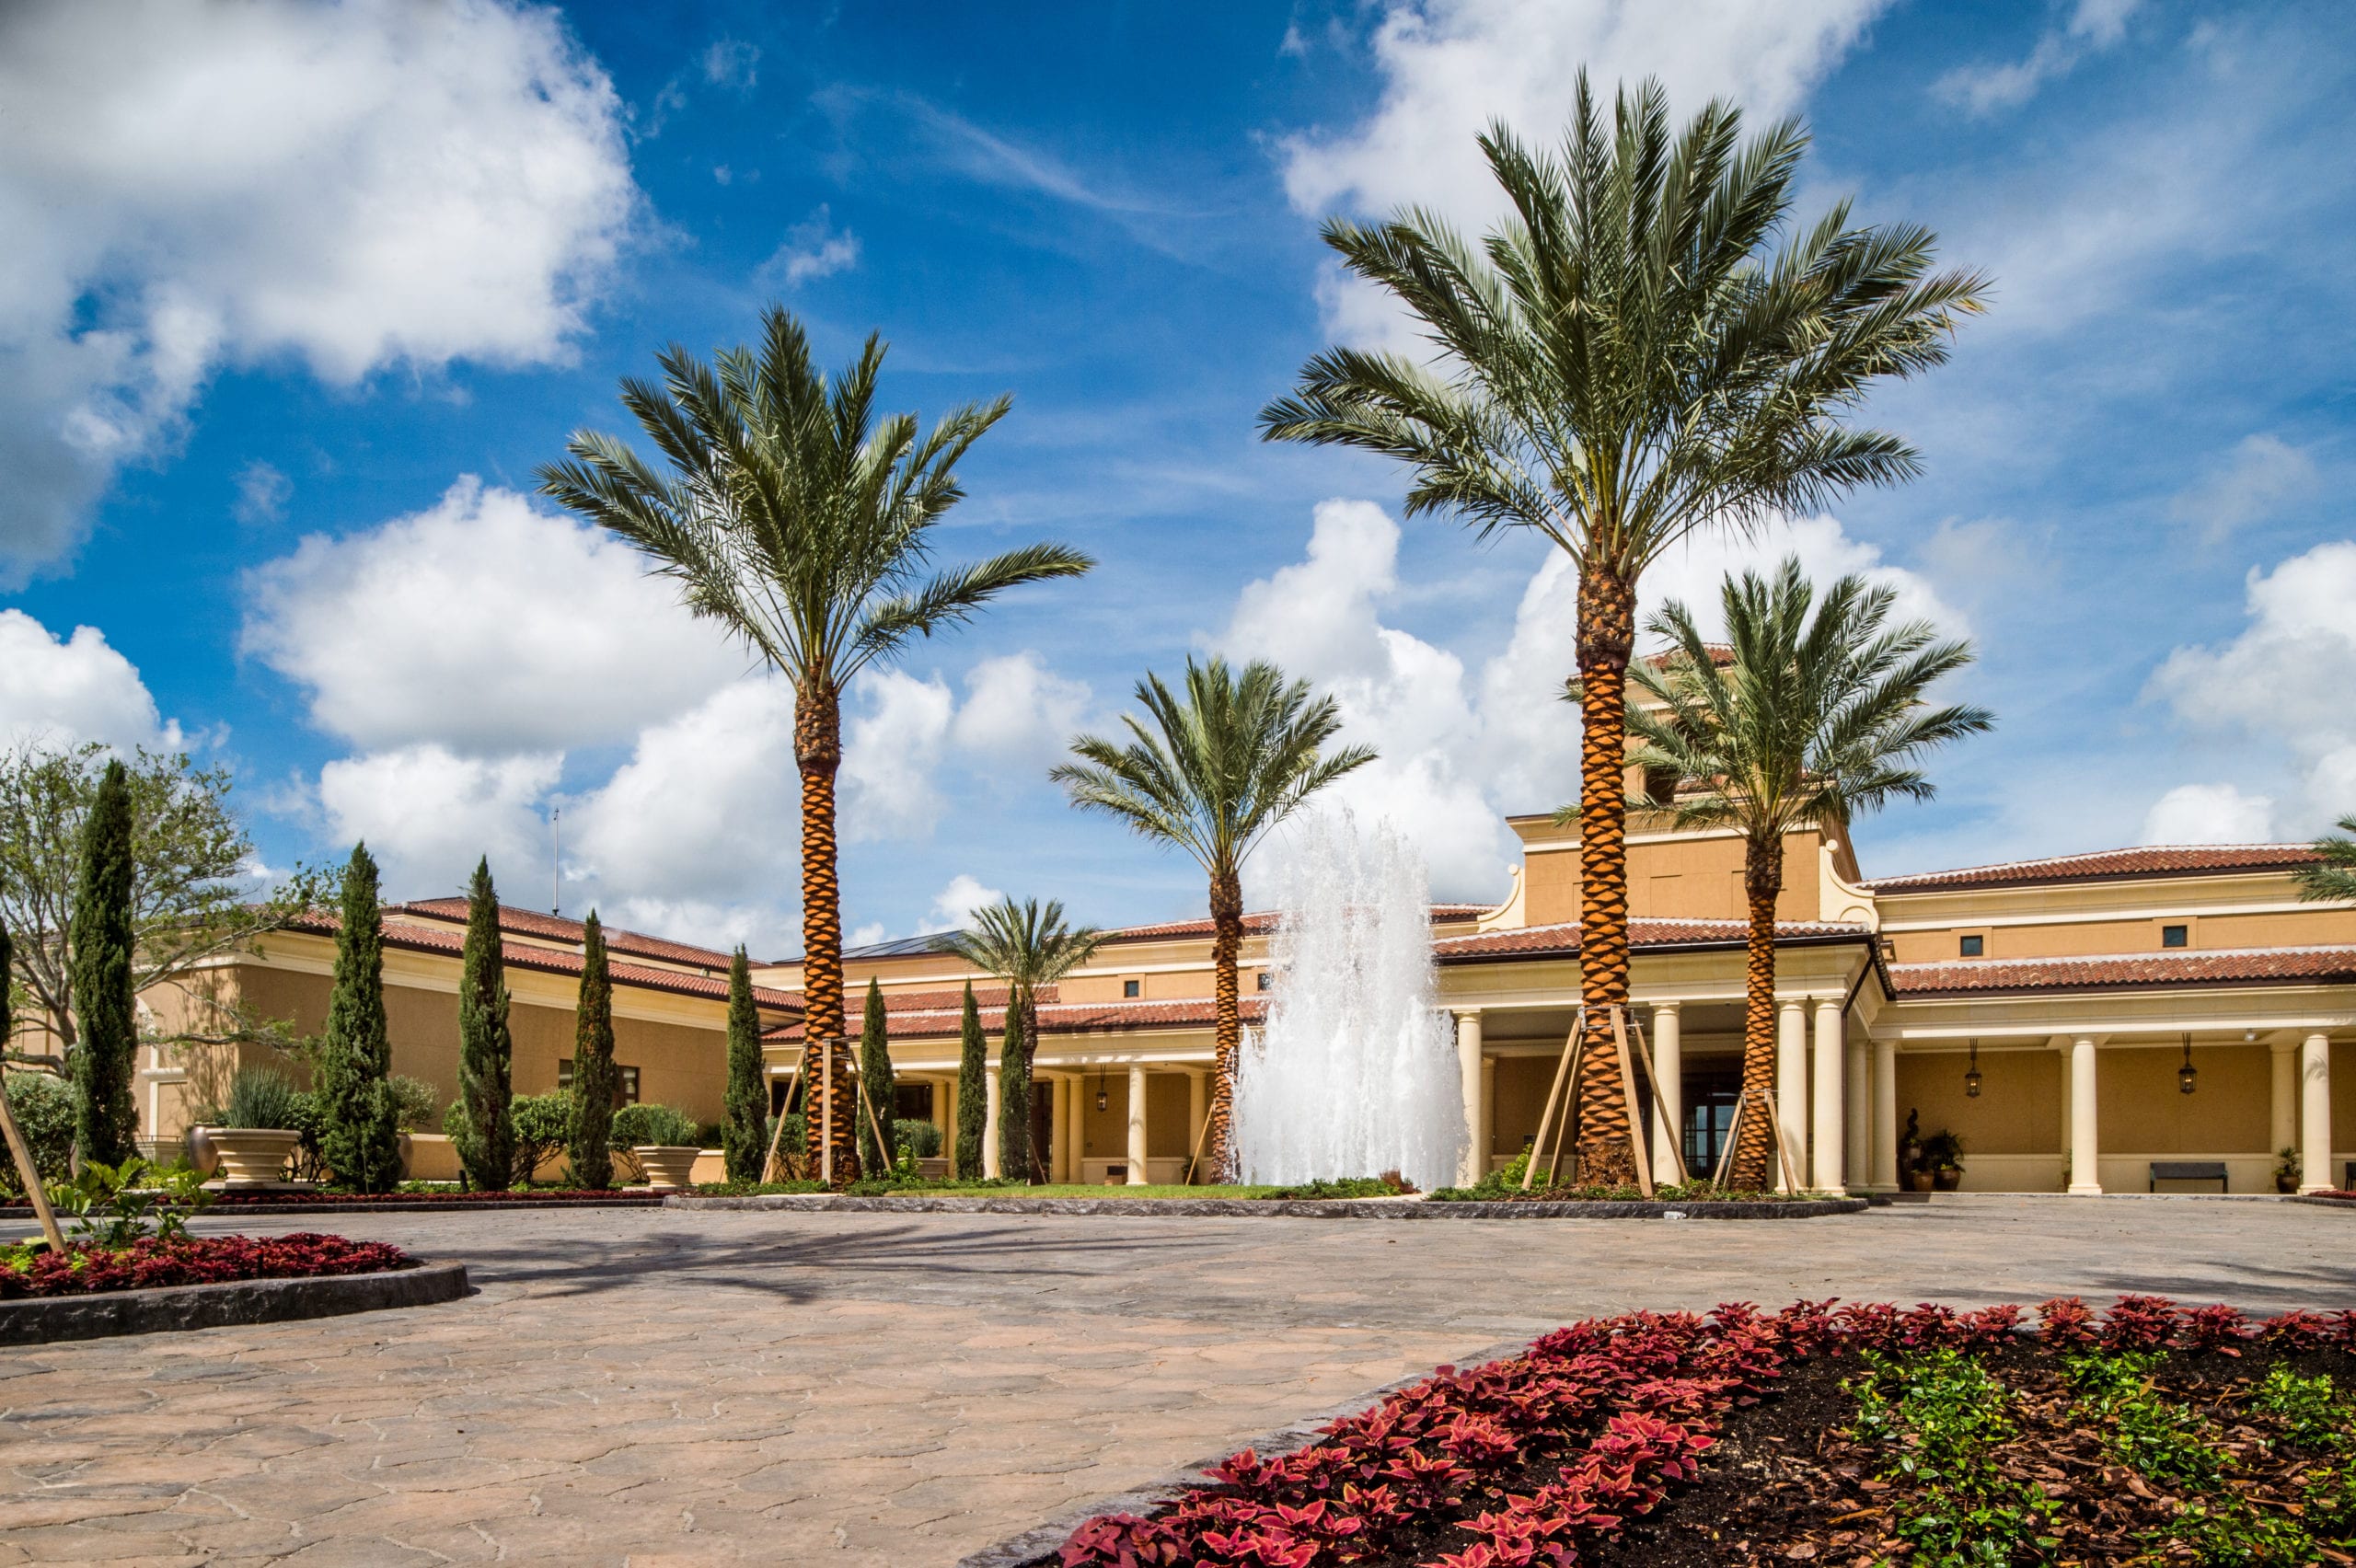 Four Seasons Building with walkway, trees and palm trees with fountain